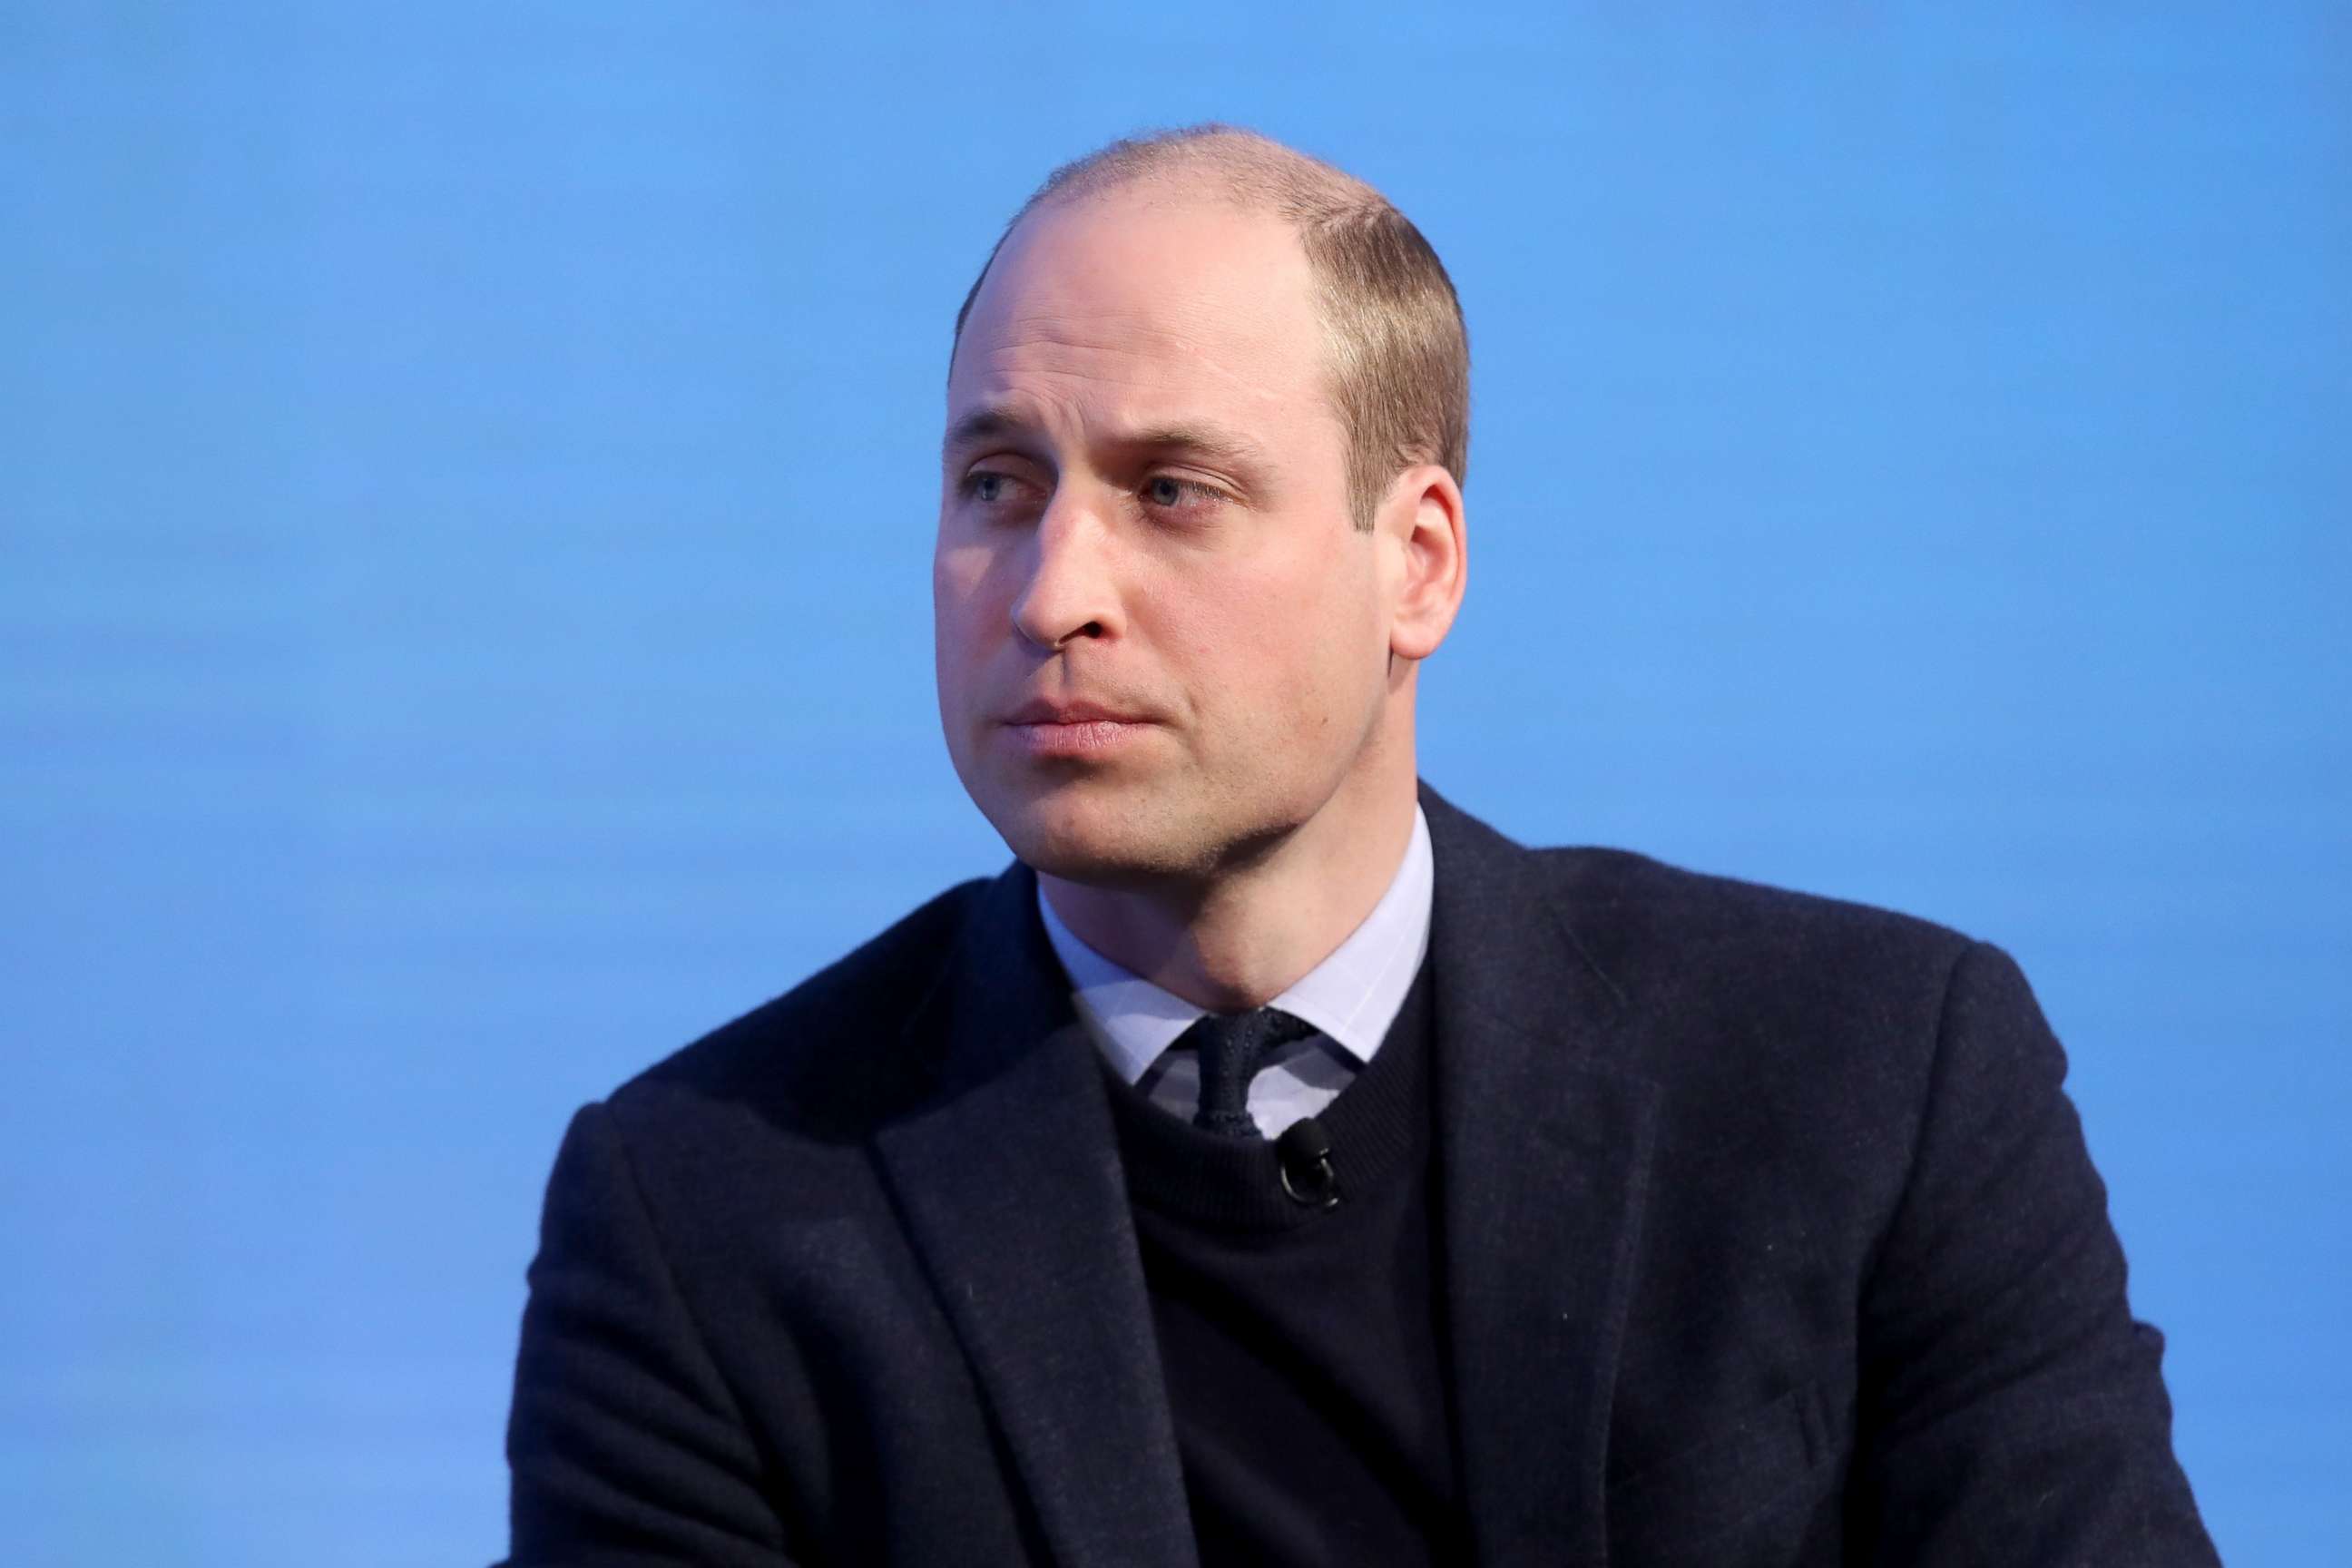 PHOTO: Prince William, Duke of Cambridge attends the first annual Royal Foundation Forum held at Aviva, Feb. 28, 2018, in London.